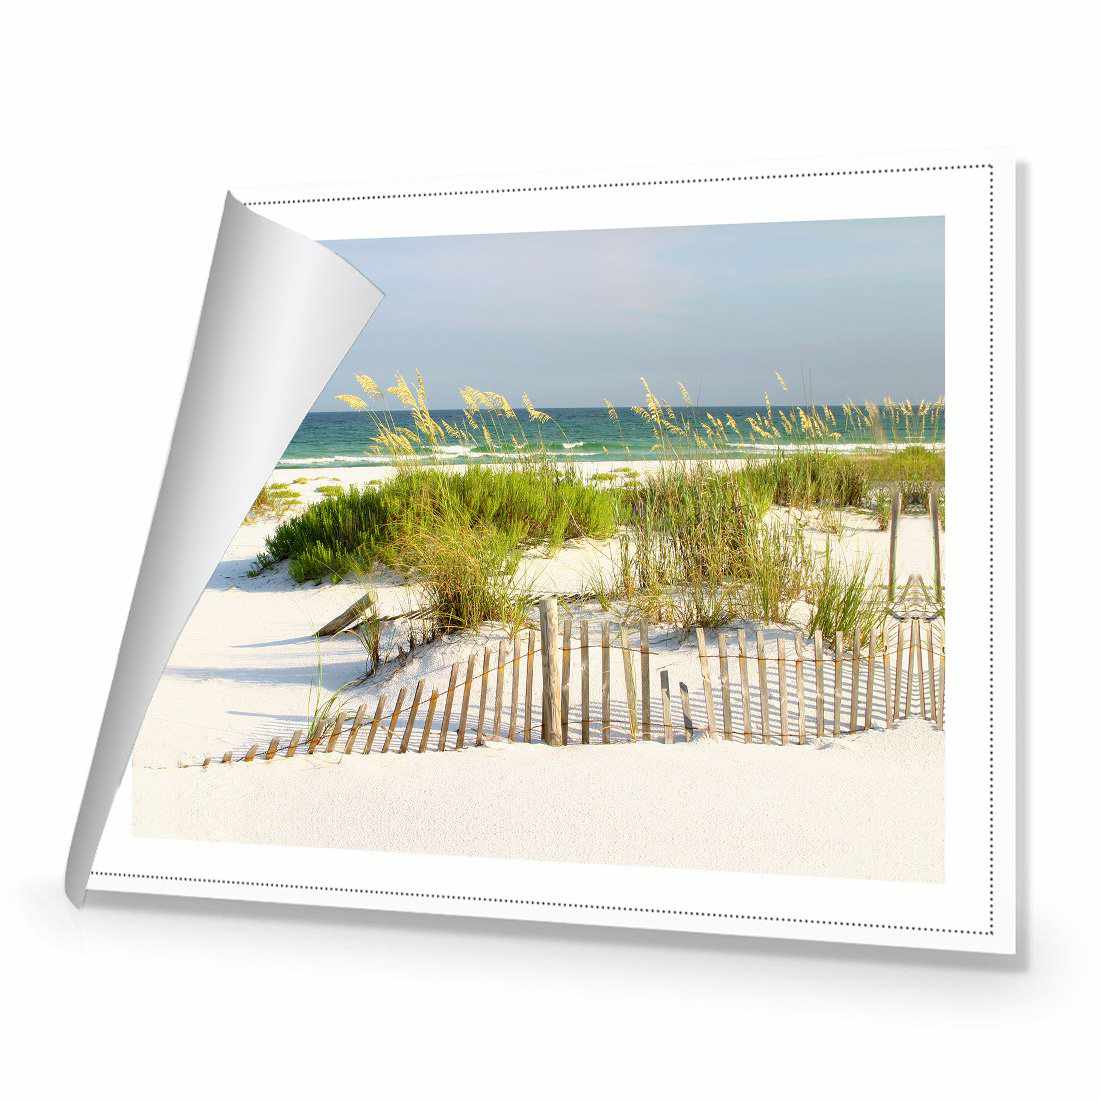 Sand Dune Reflections Canvas Art-Canvas-Wall Art Designs-45x30cm-Rolled Canvas-Wall Art Designs